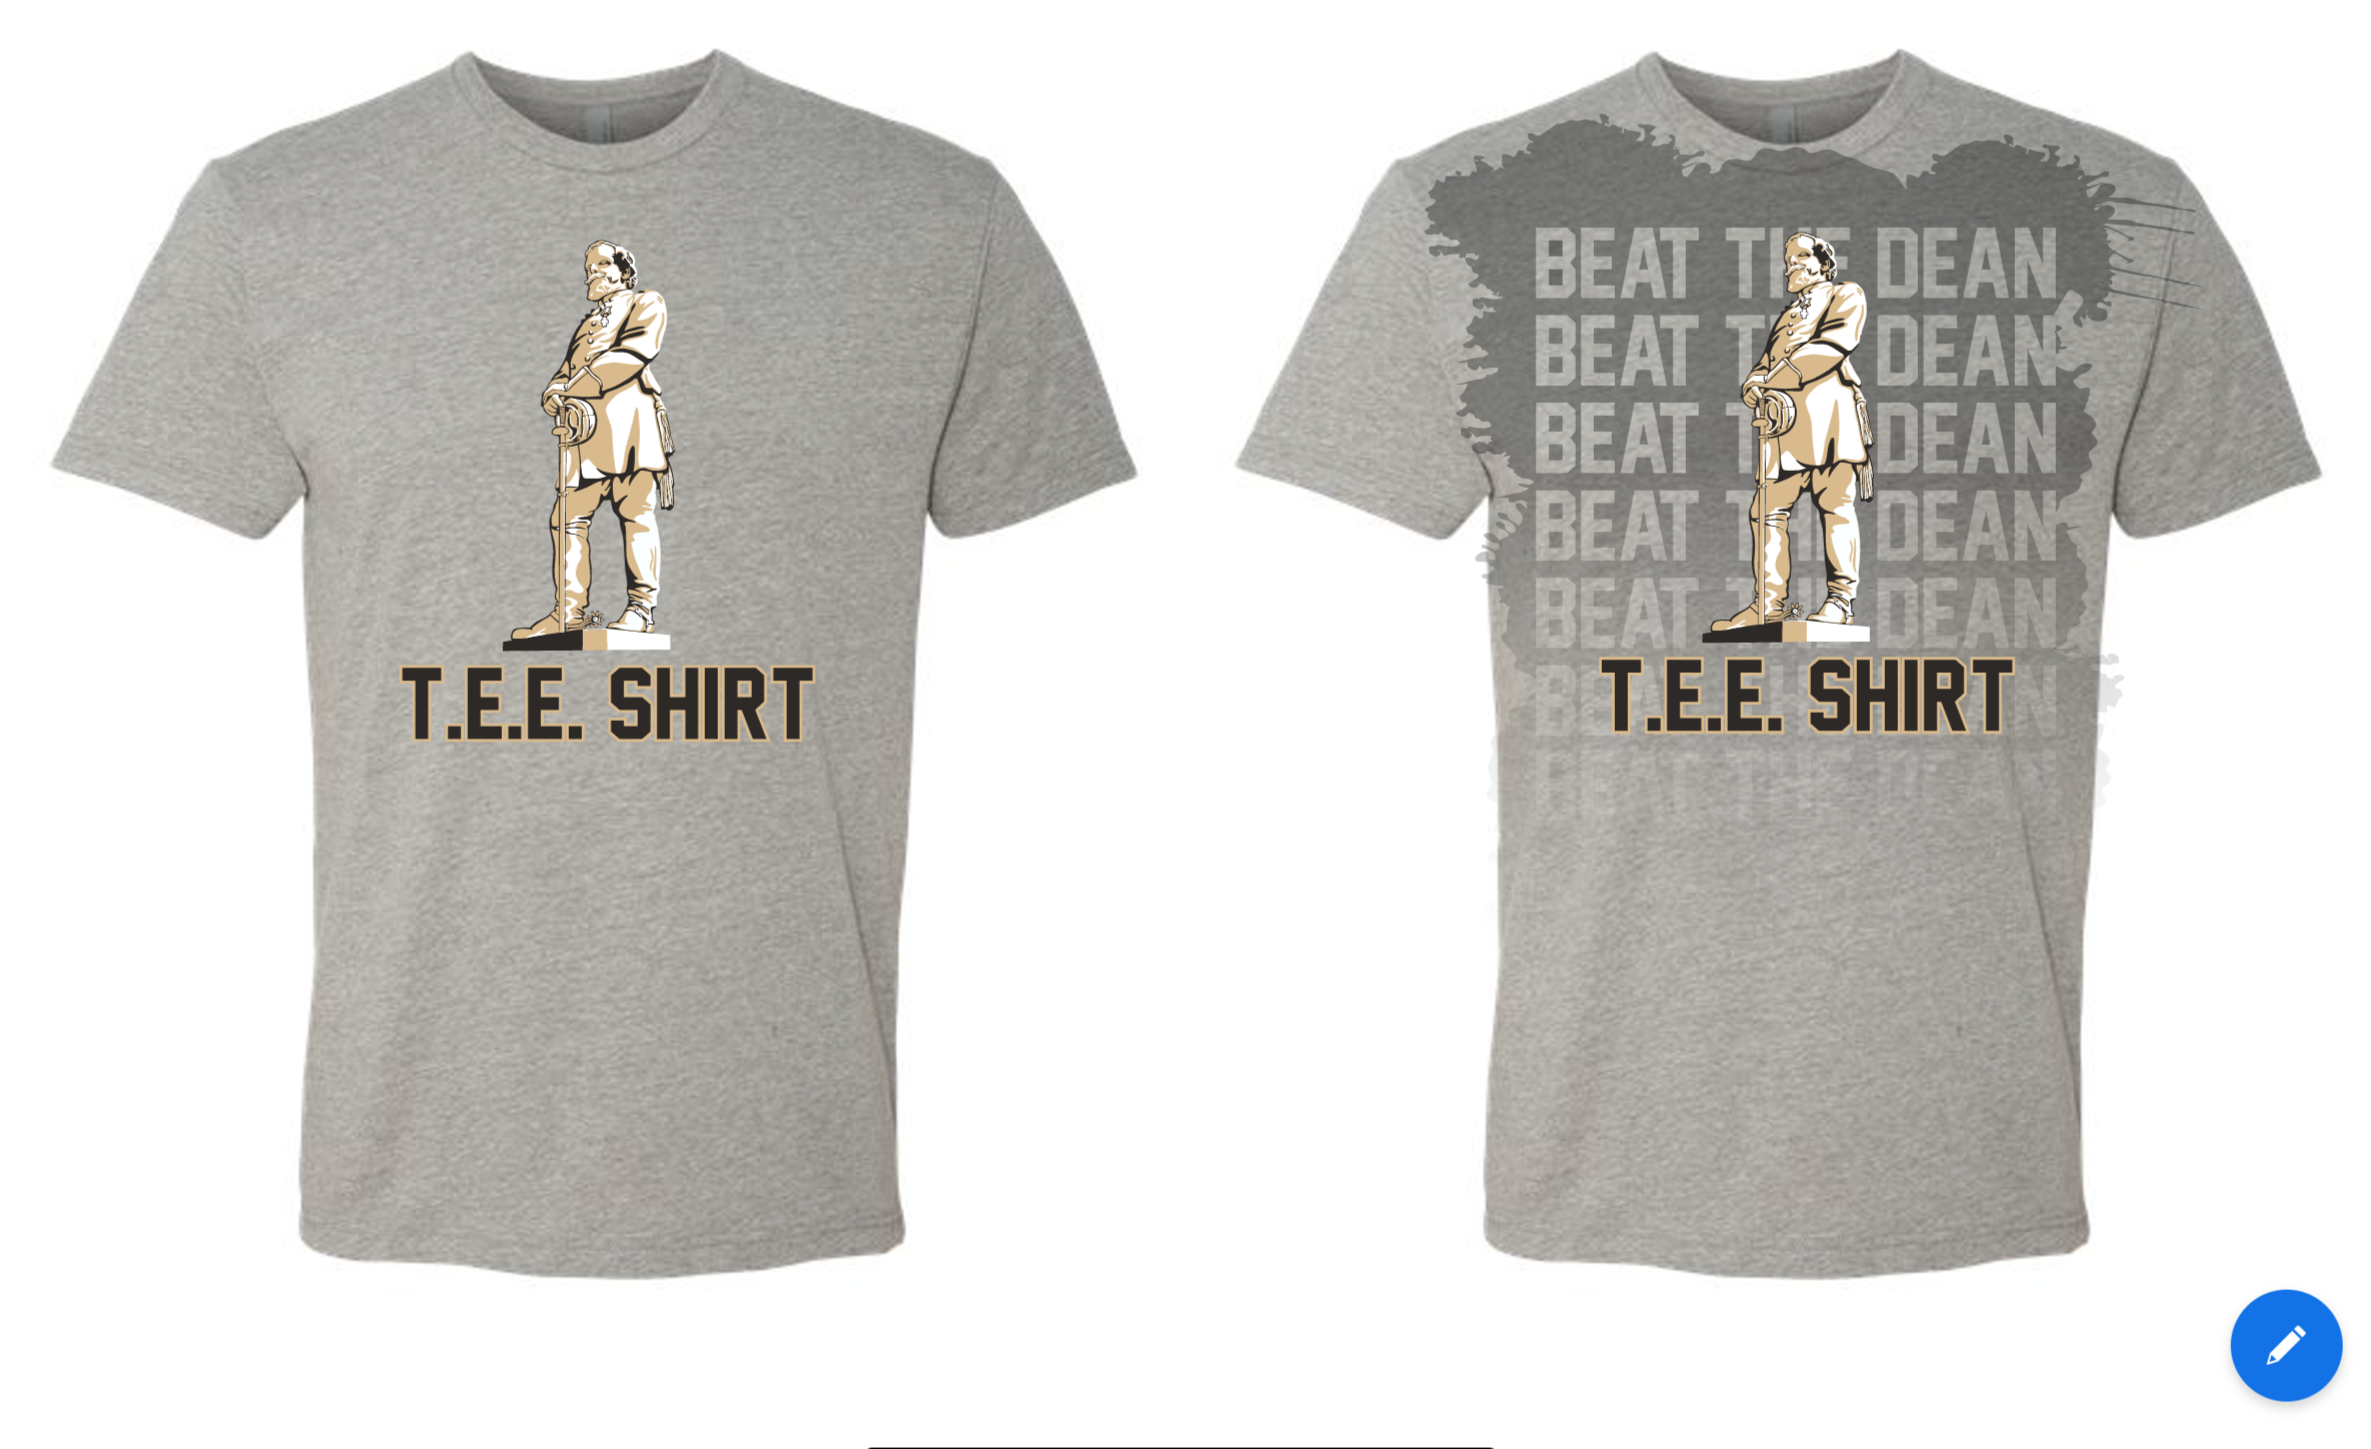 BEAT THE DEAN T.E.E. Shirt (Officially Licensed by USMA)